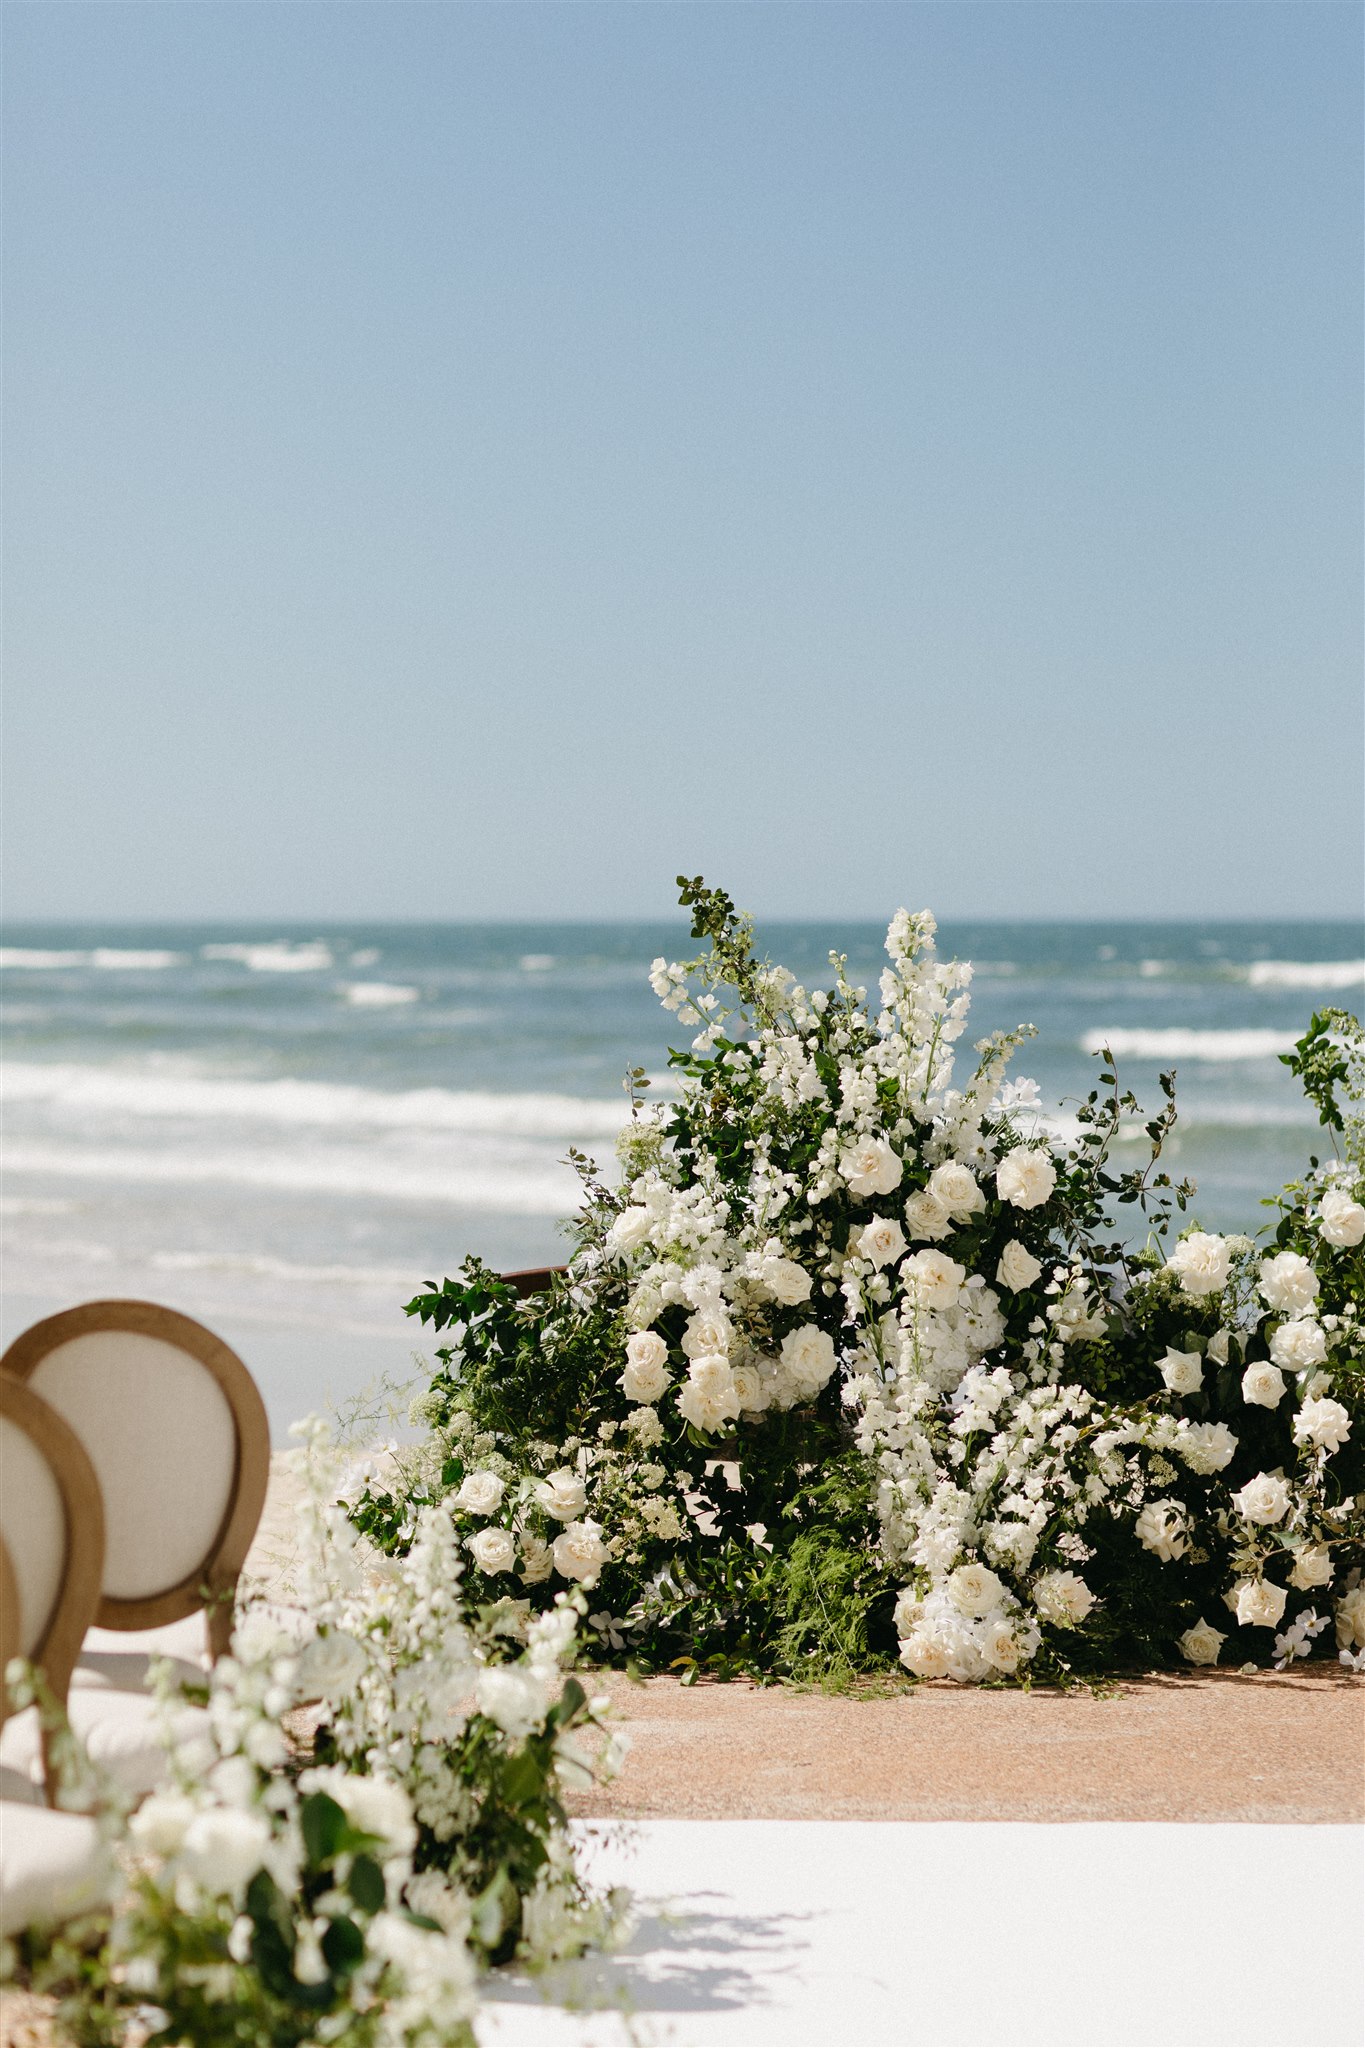 Nicole + Andy's Coastal Luxe Wedding at Rick Shores, Gold Coast Wedding Venue | The Events Lounge